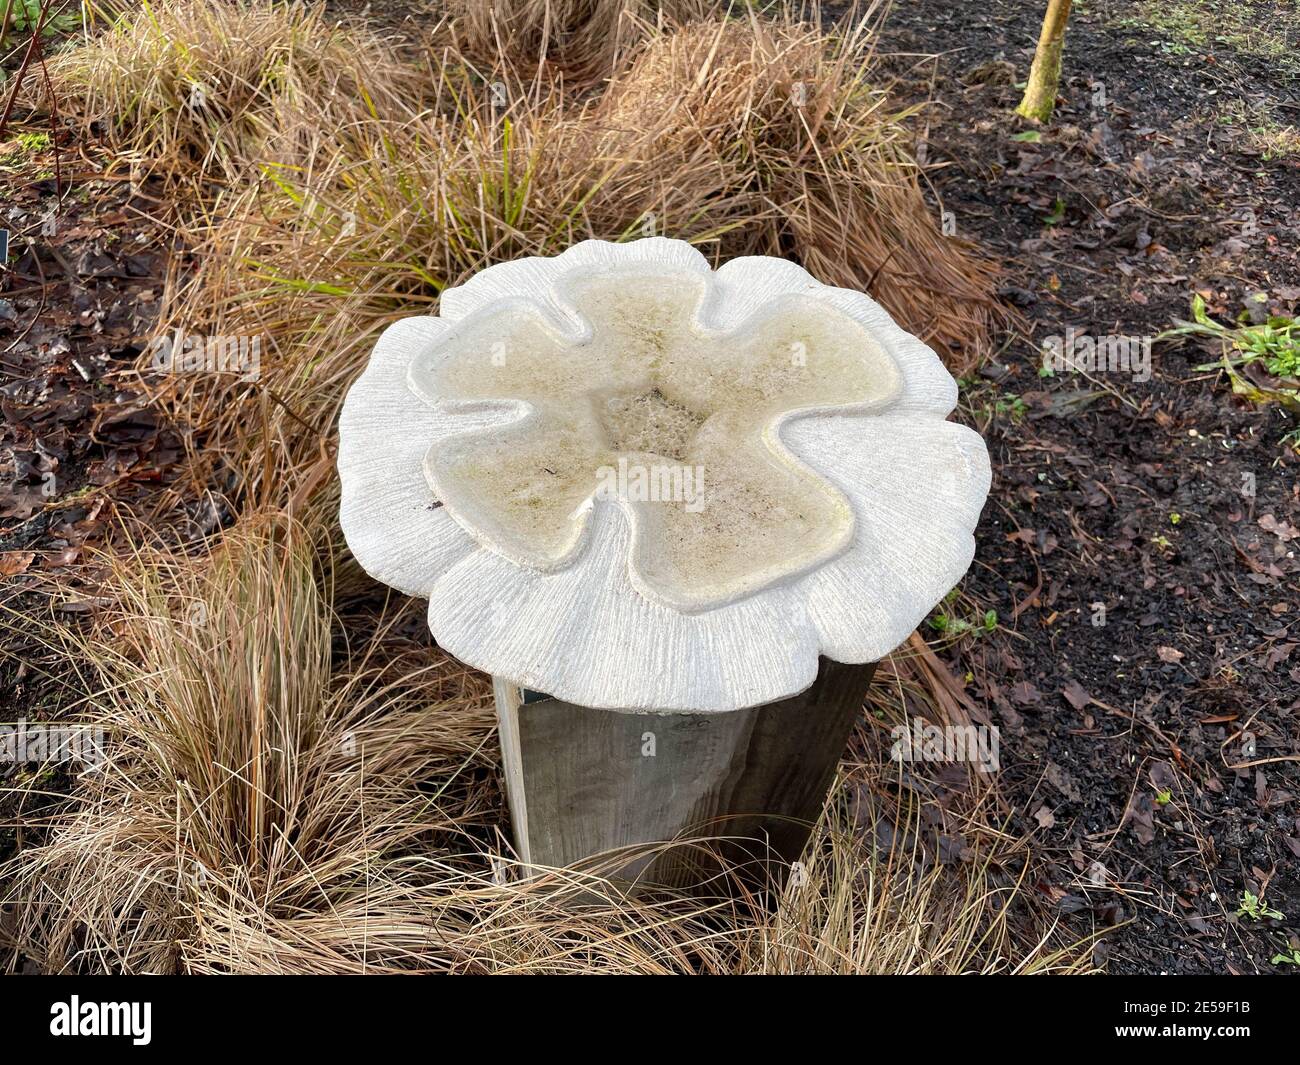 Carved White Stone Bird Bath Surrounded by Winter Foliage of an Ornamental Grass in a Herbaceous Border at Rosemoor Garden in Rural Devon, England, UK Stock Photo